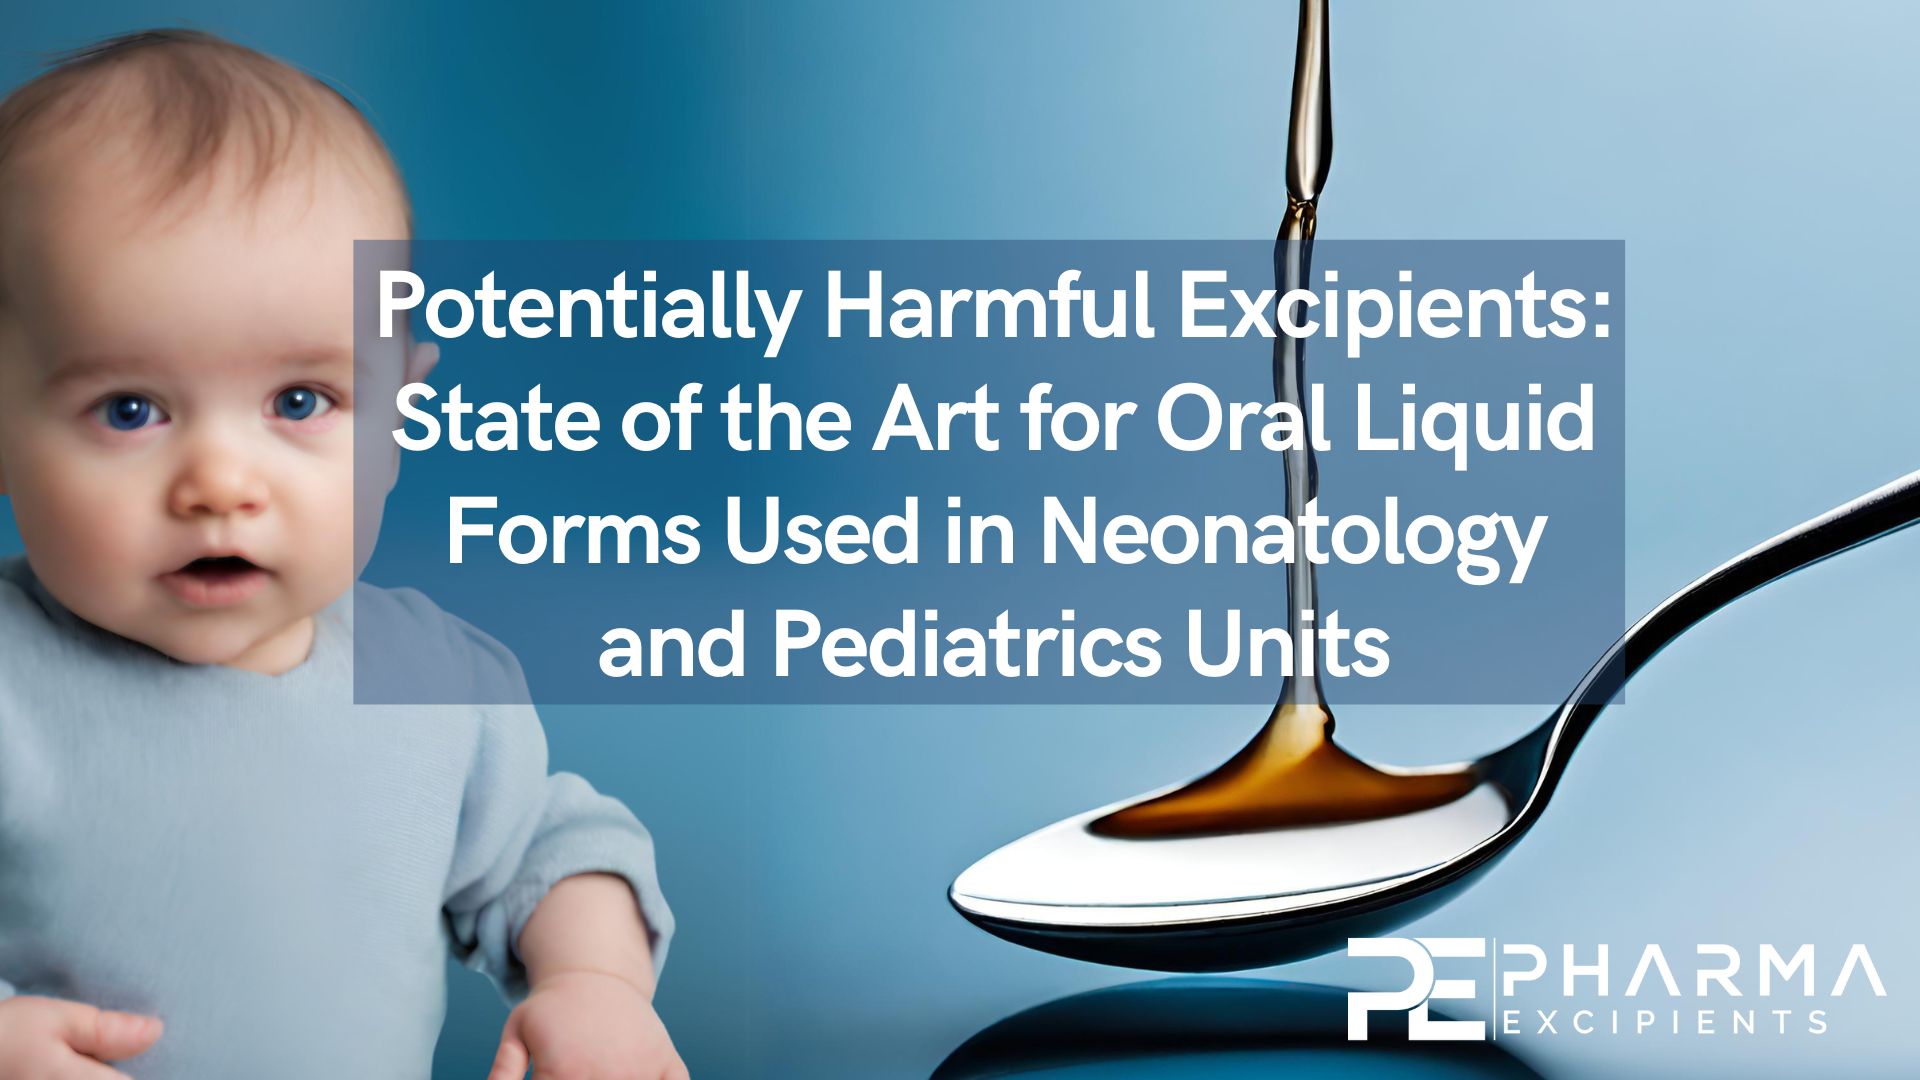 Potentially-Harmful-Excipients-State-of-the-Art-for-Oral-Liquid-Forms-Used-in-Neonatology-and-Pediatrics-Units.jpg